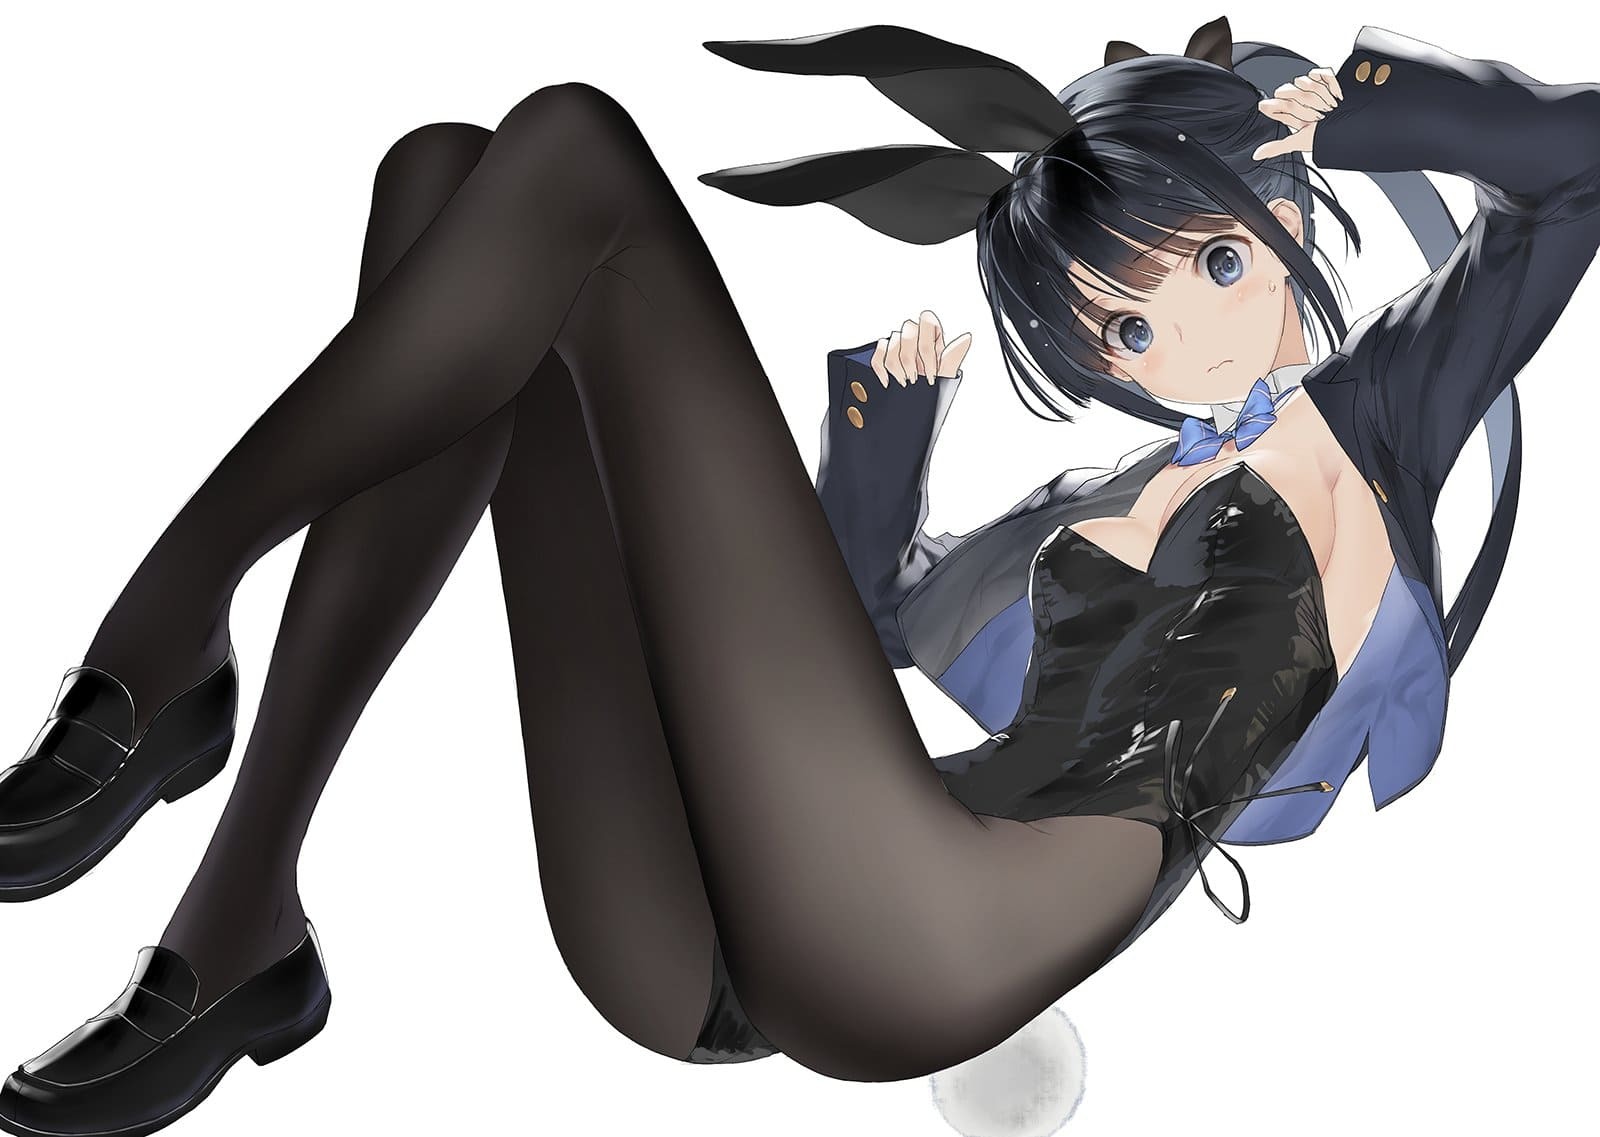 Today is Bunny Girls' Day in Japan